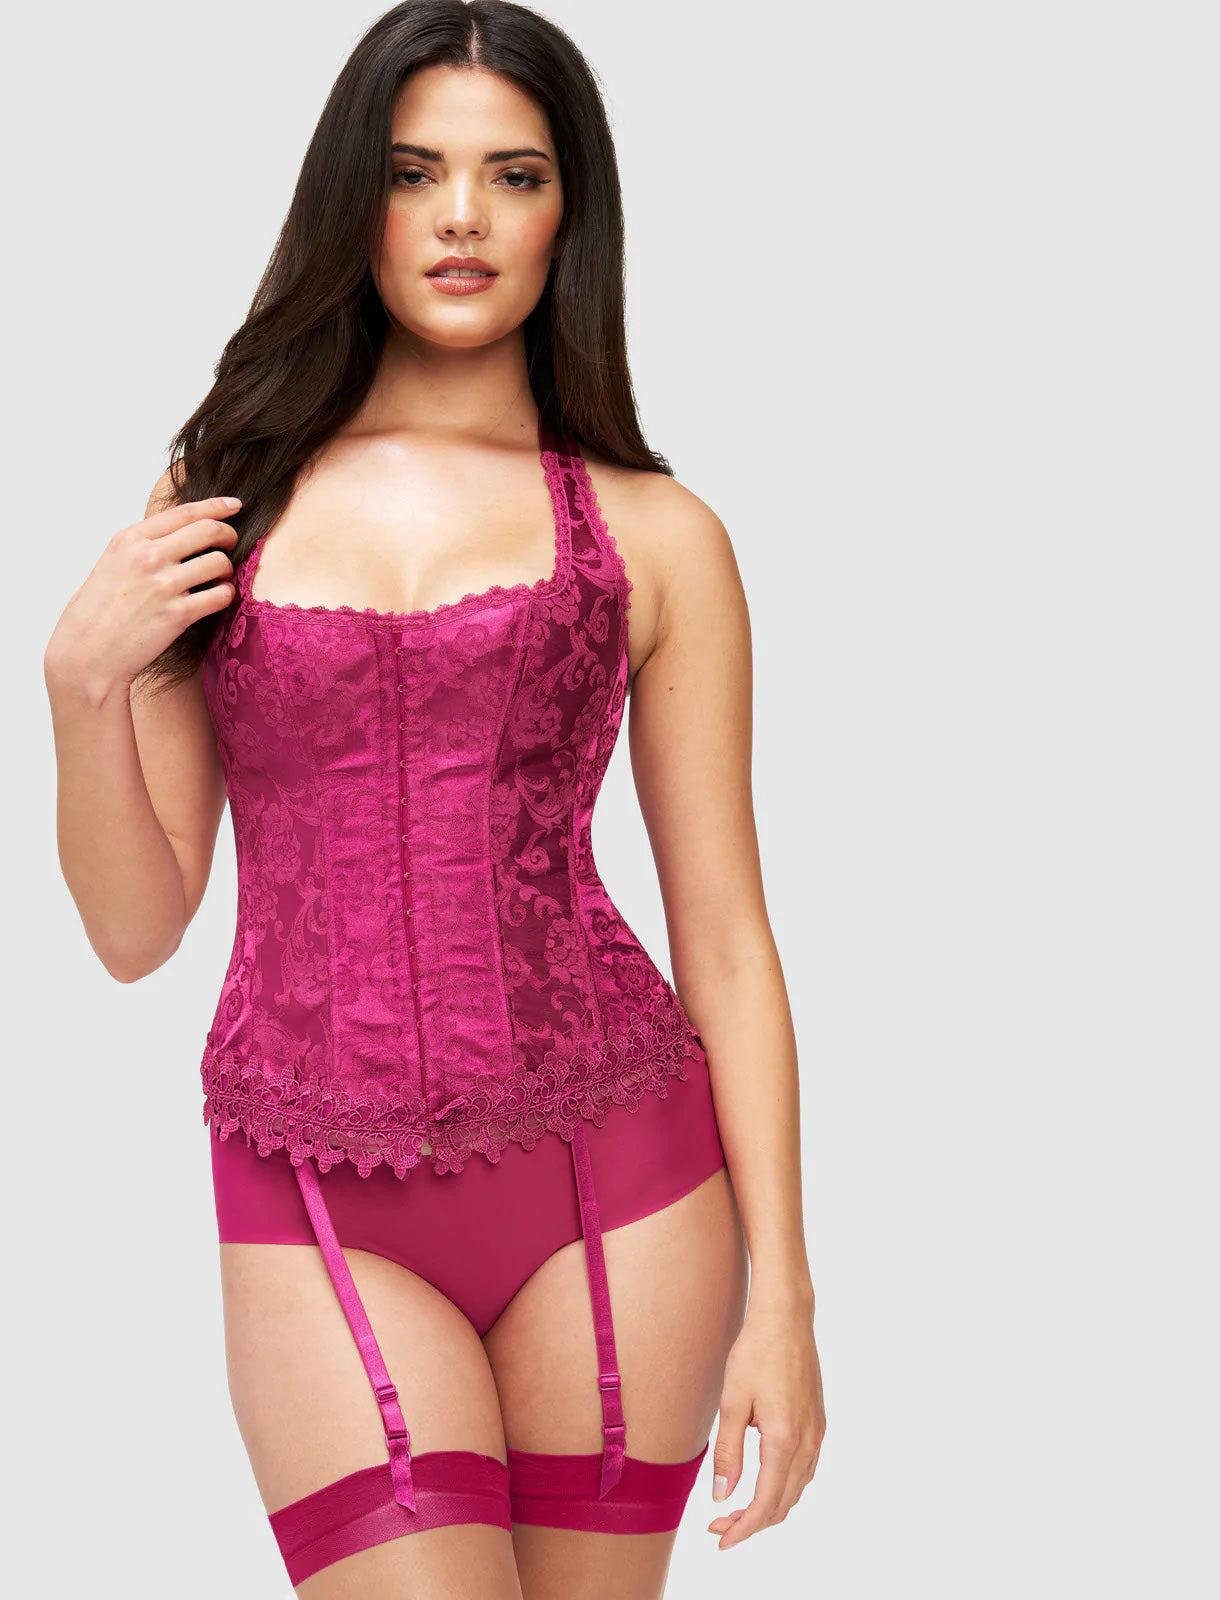 Hollywood Dream Halter Corset in Festival Fuchsia by FREDERICK'S OF HOLLYWOOD